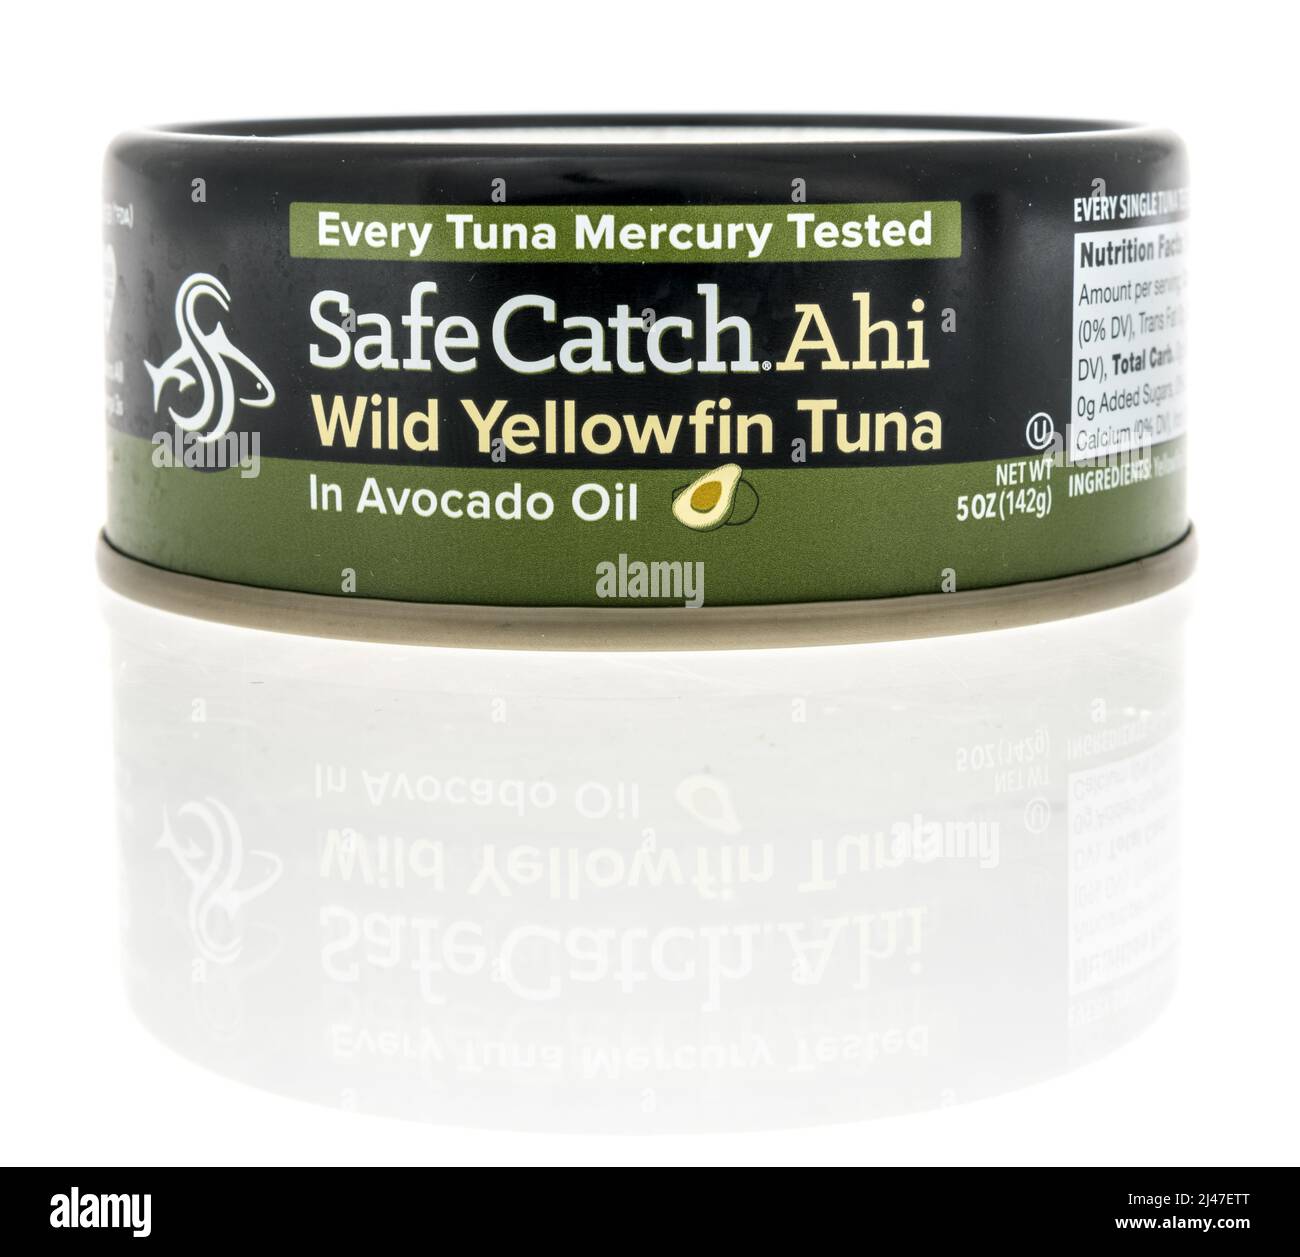 Winneconne, WI -10 April 2022: A can of safe catch ahi wild yellowfin tuna on an isolated background Stock Photo